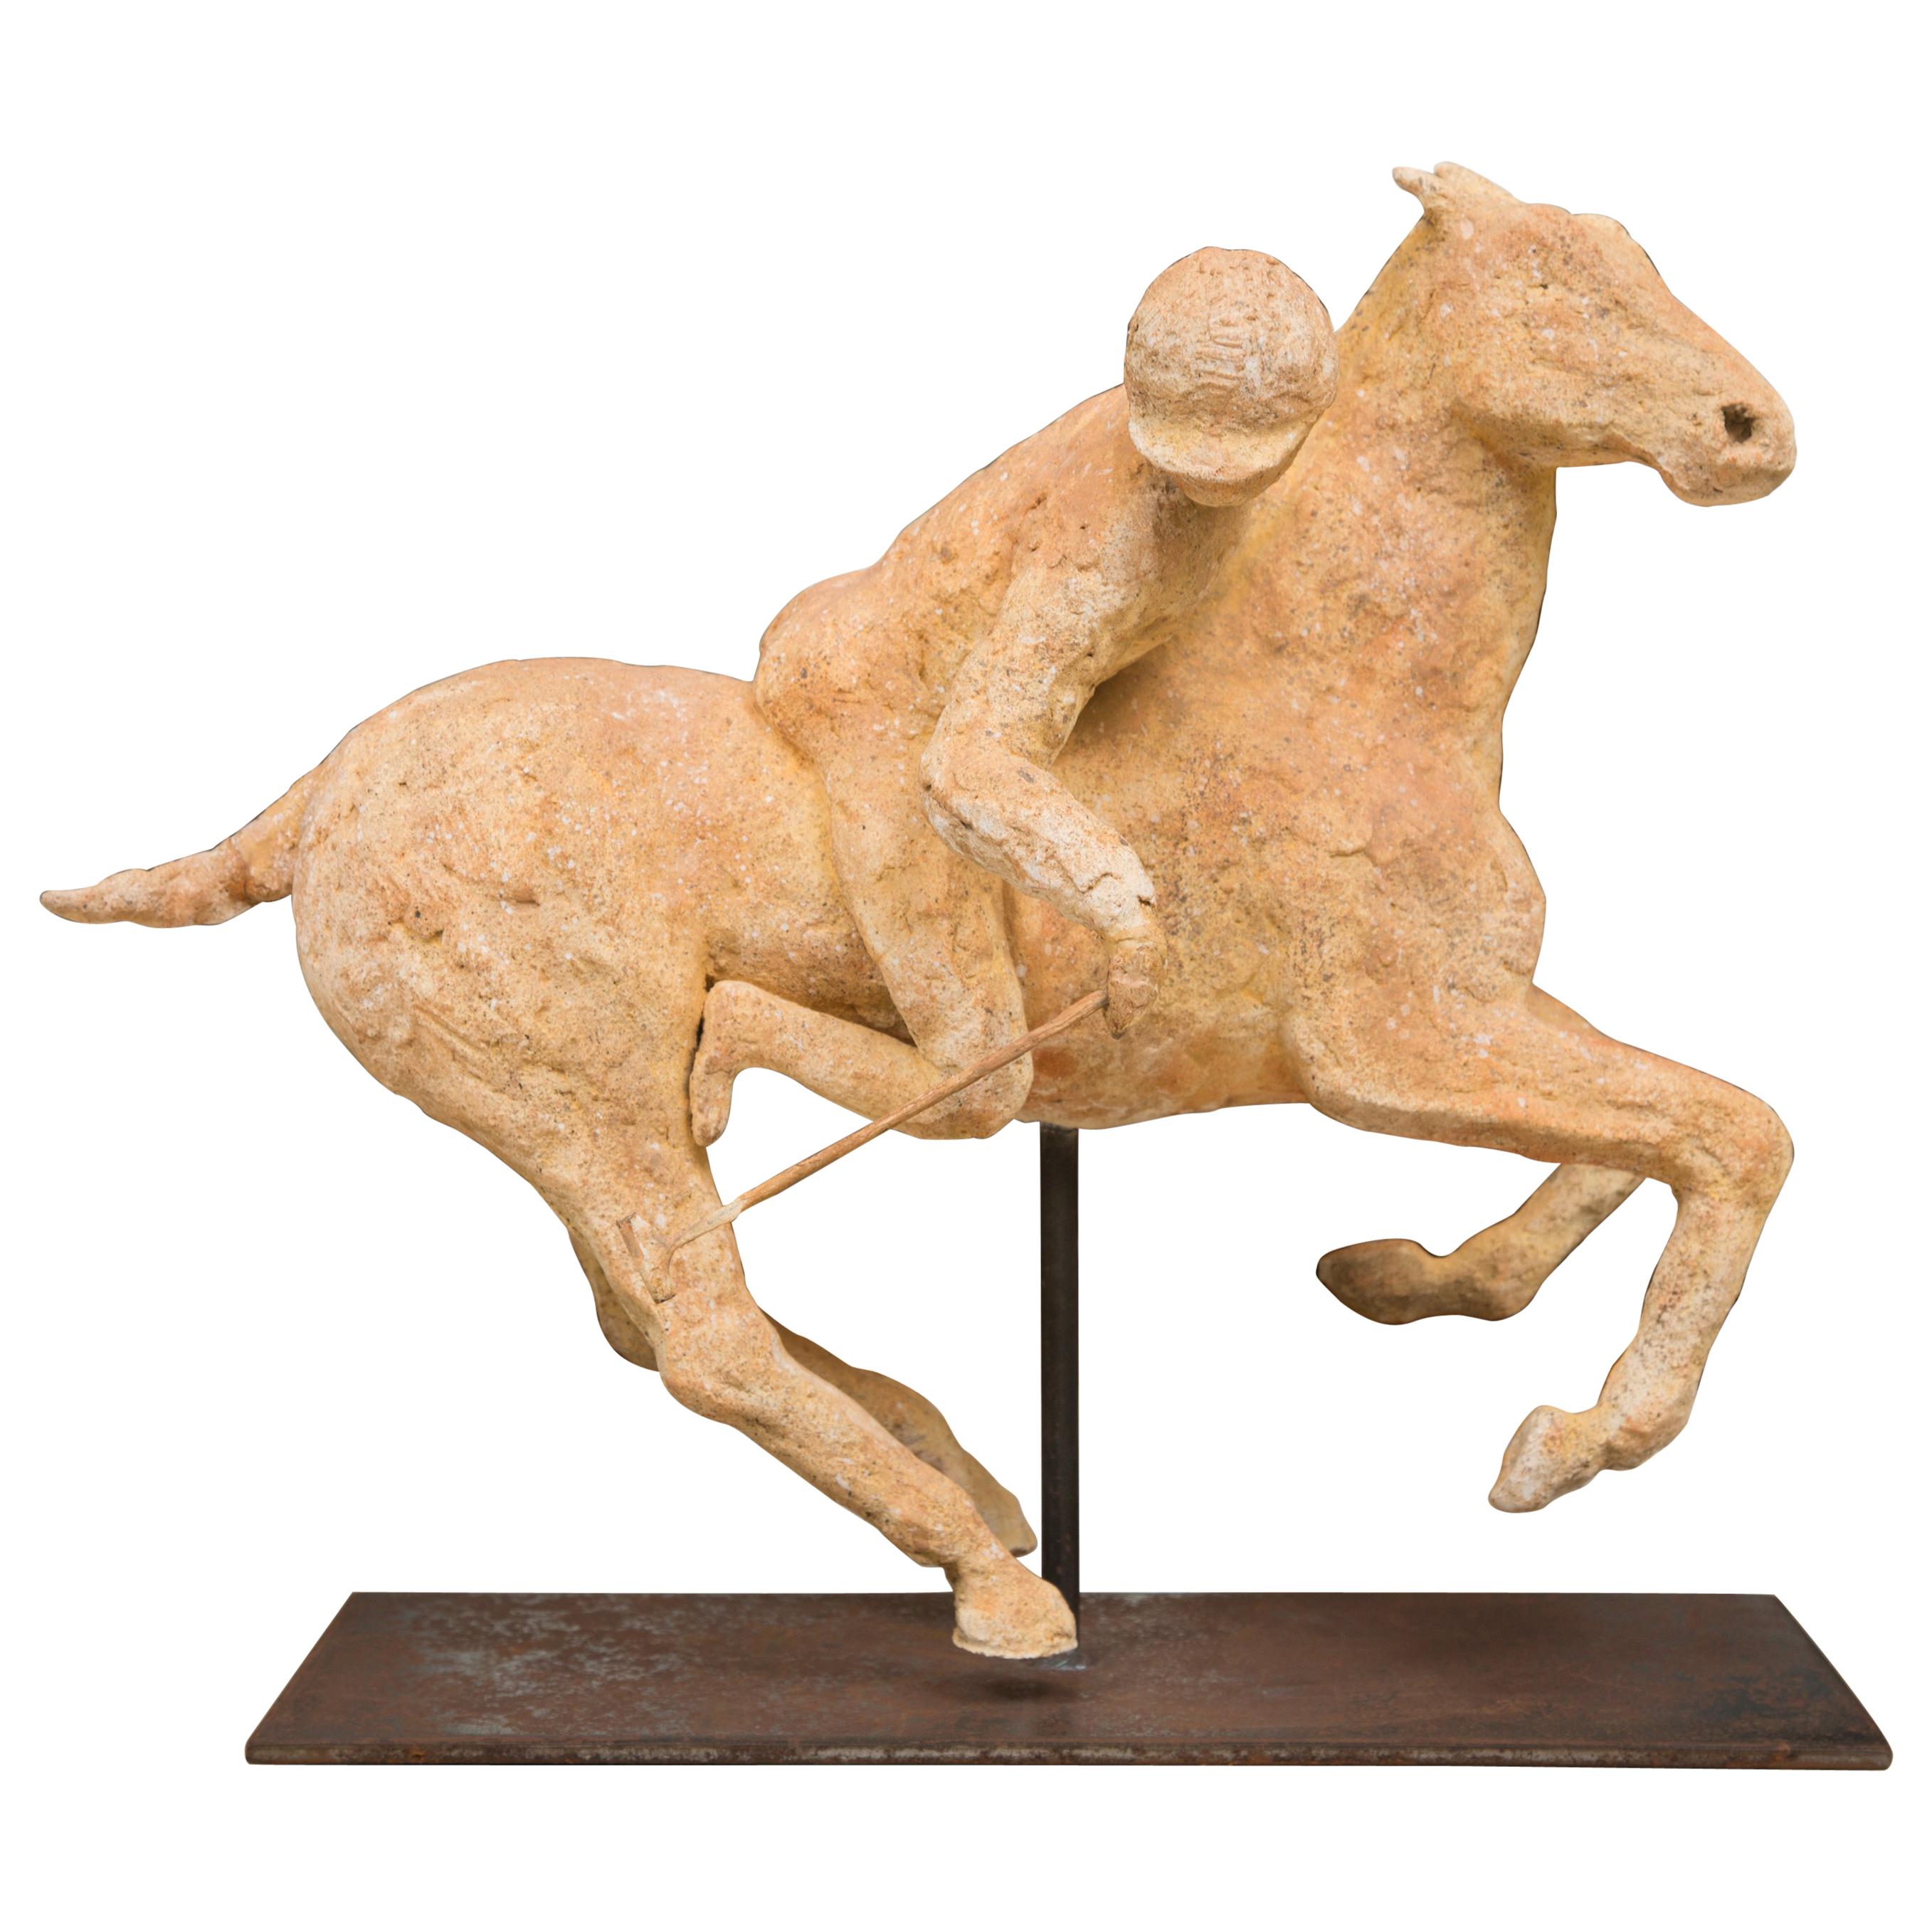 Terracotta Polo Player on a horse mounted on a Metal Stand by "Lara"